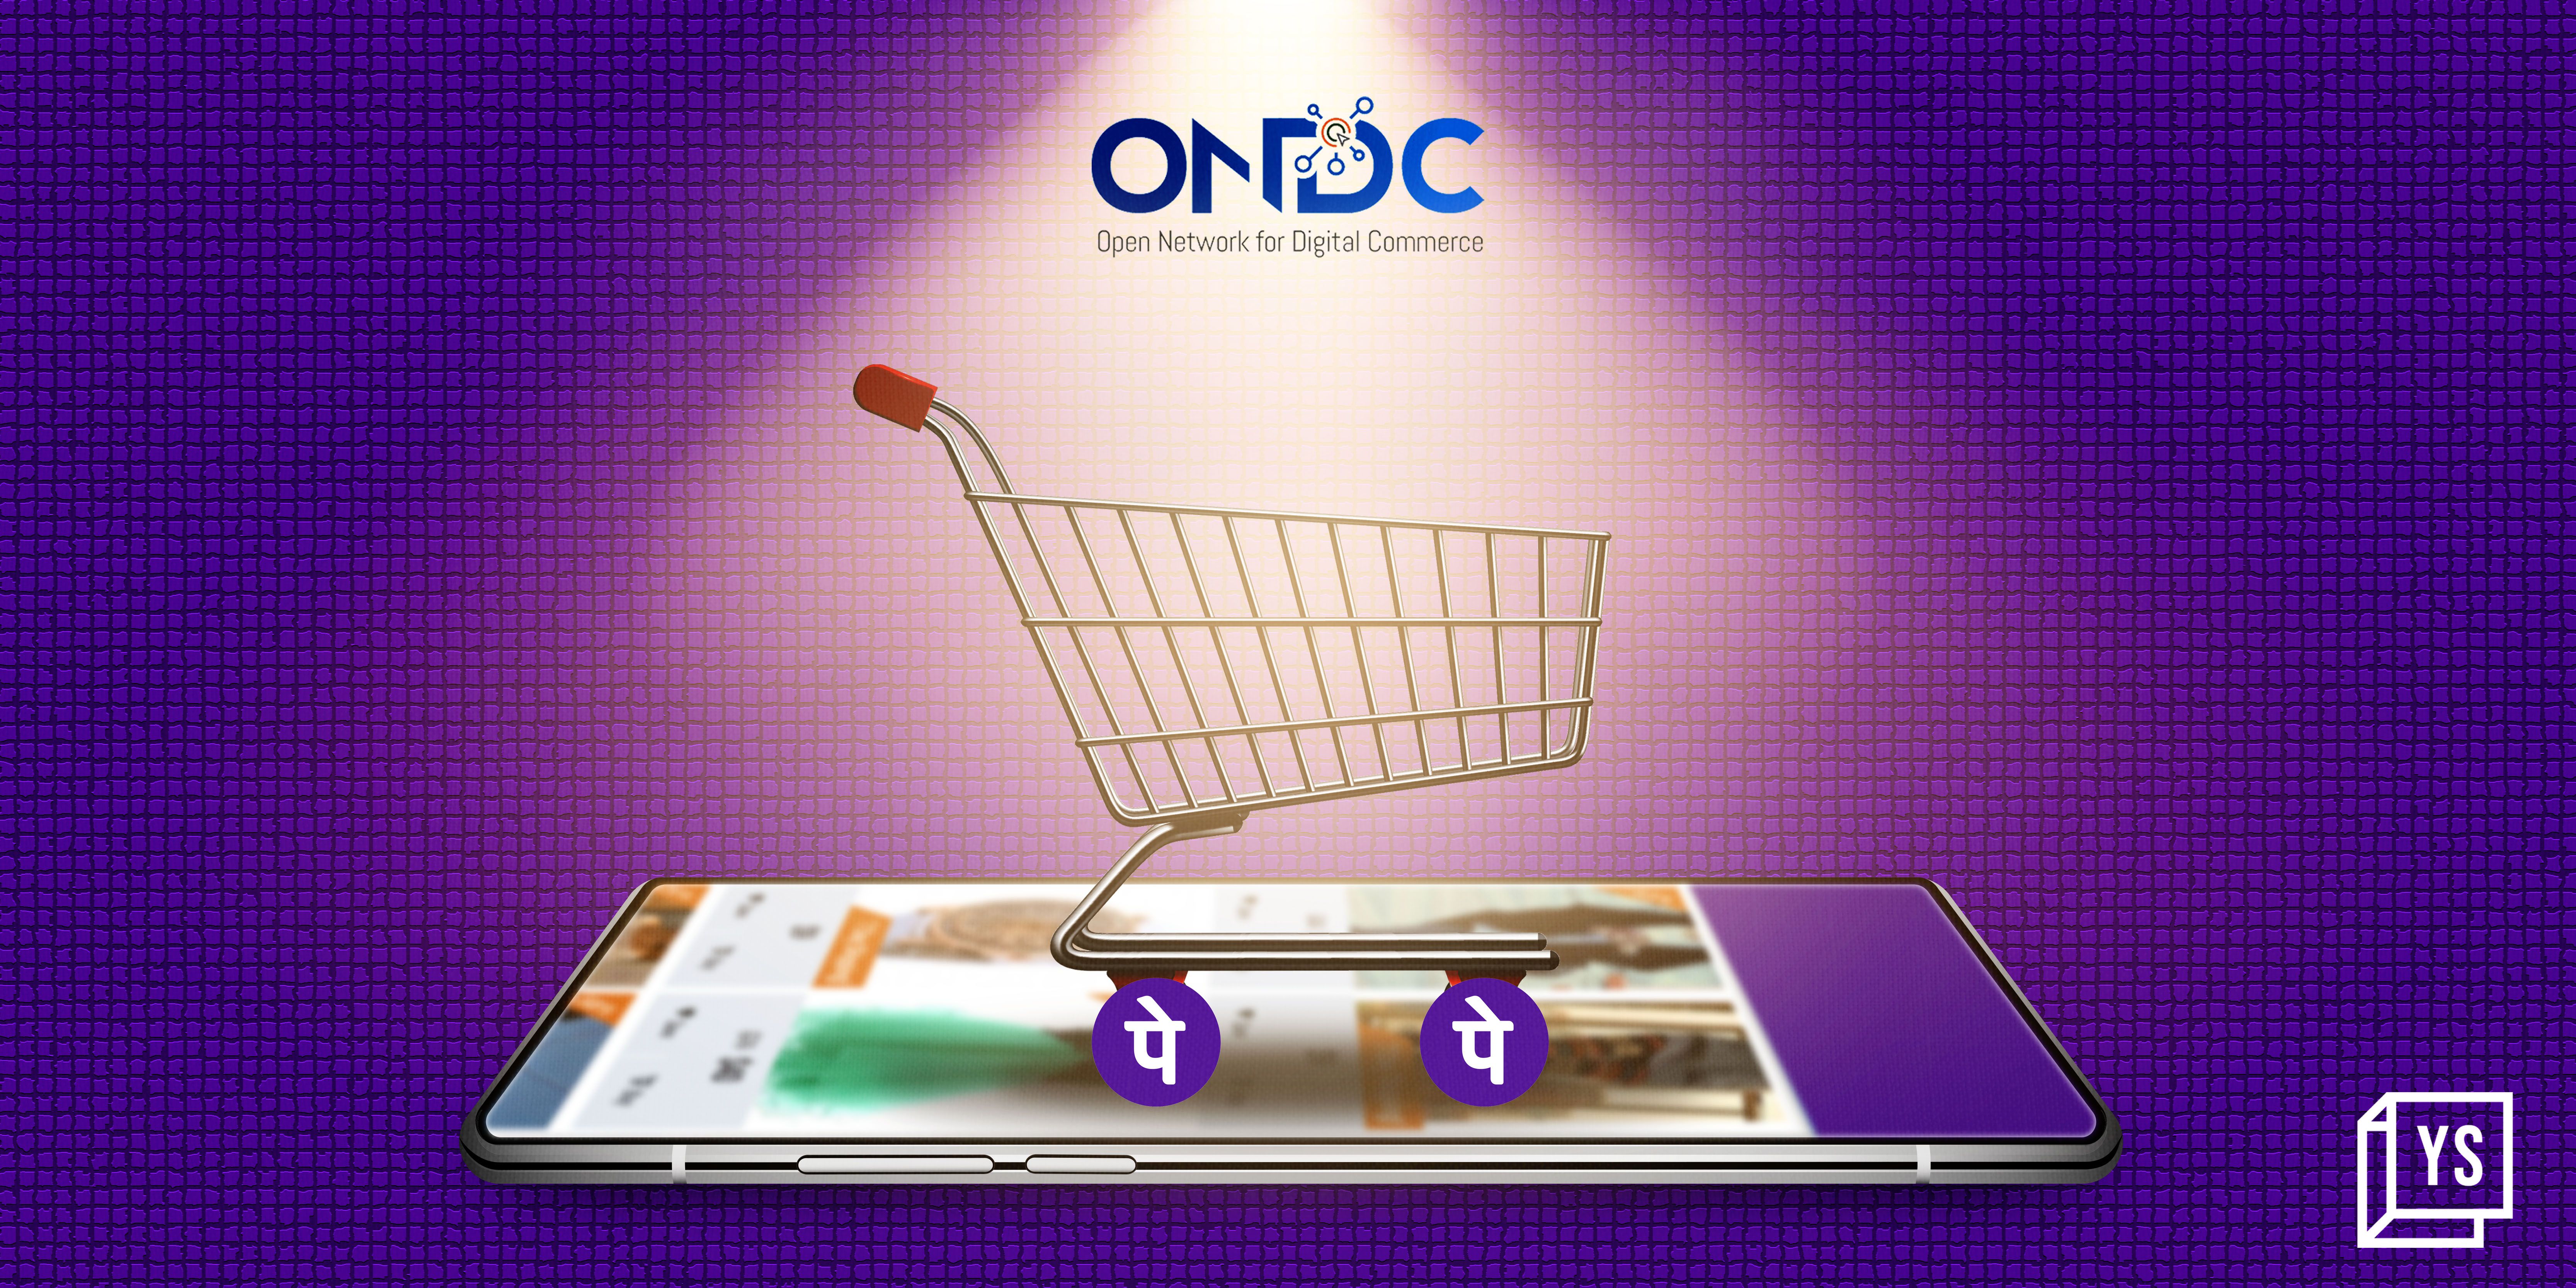 PhonePe launches hyperlocal shopping app with ONDC
